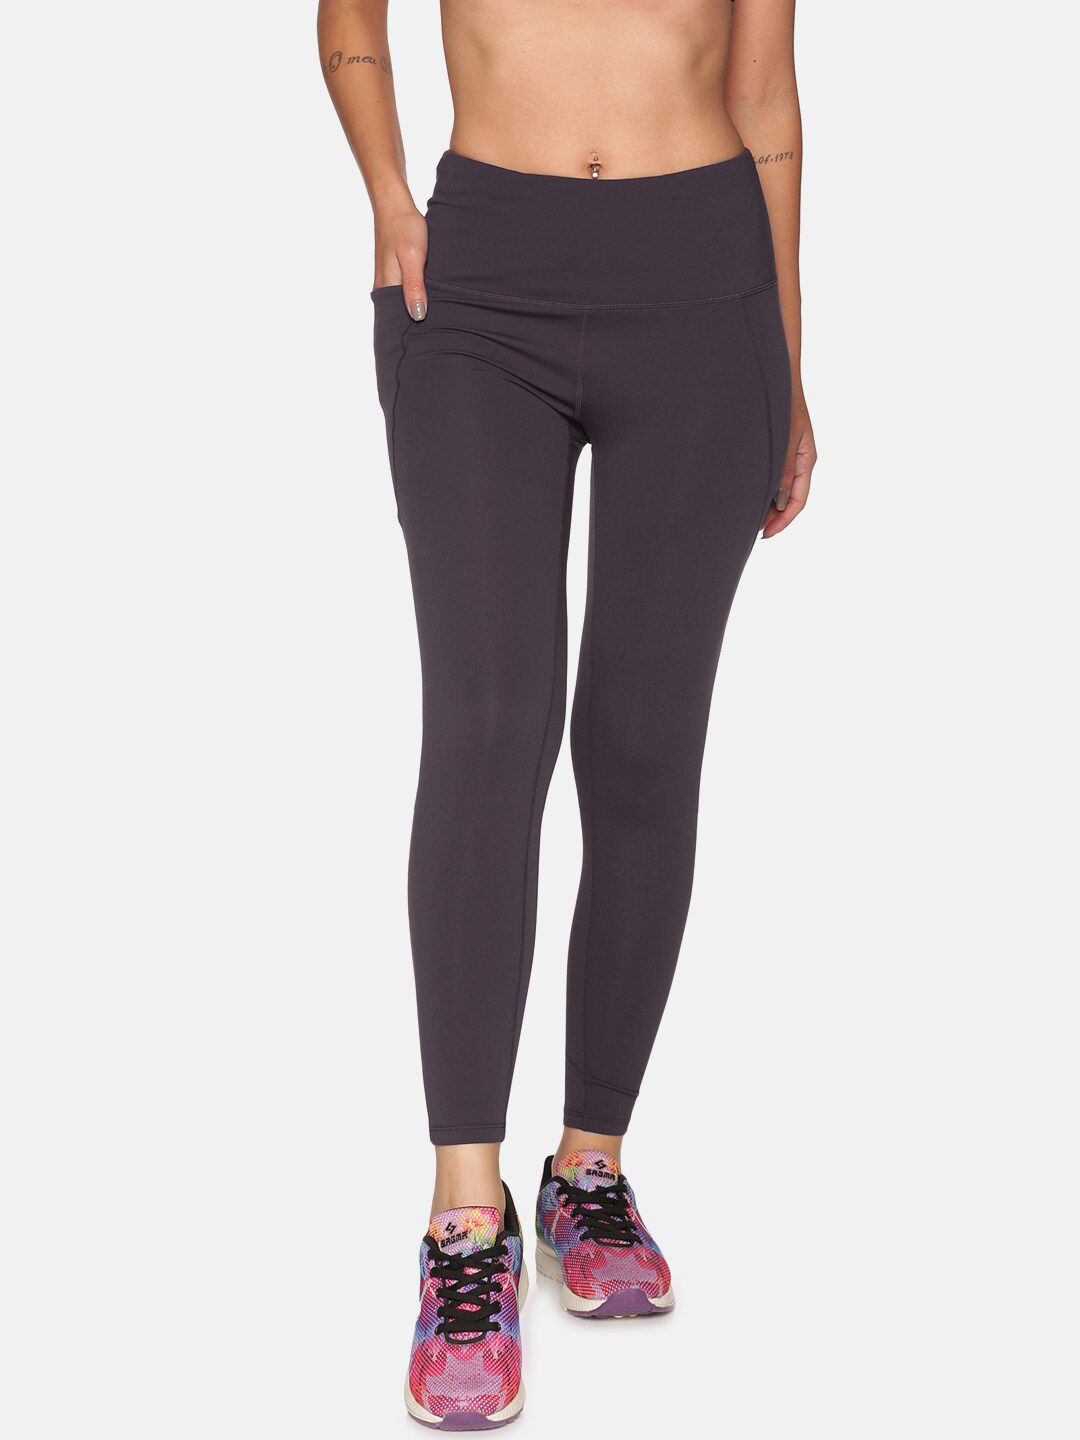 BlissClub Women Grey Super Stretchy and High Waisted The Ultimate Leggings Price in India